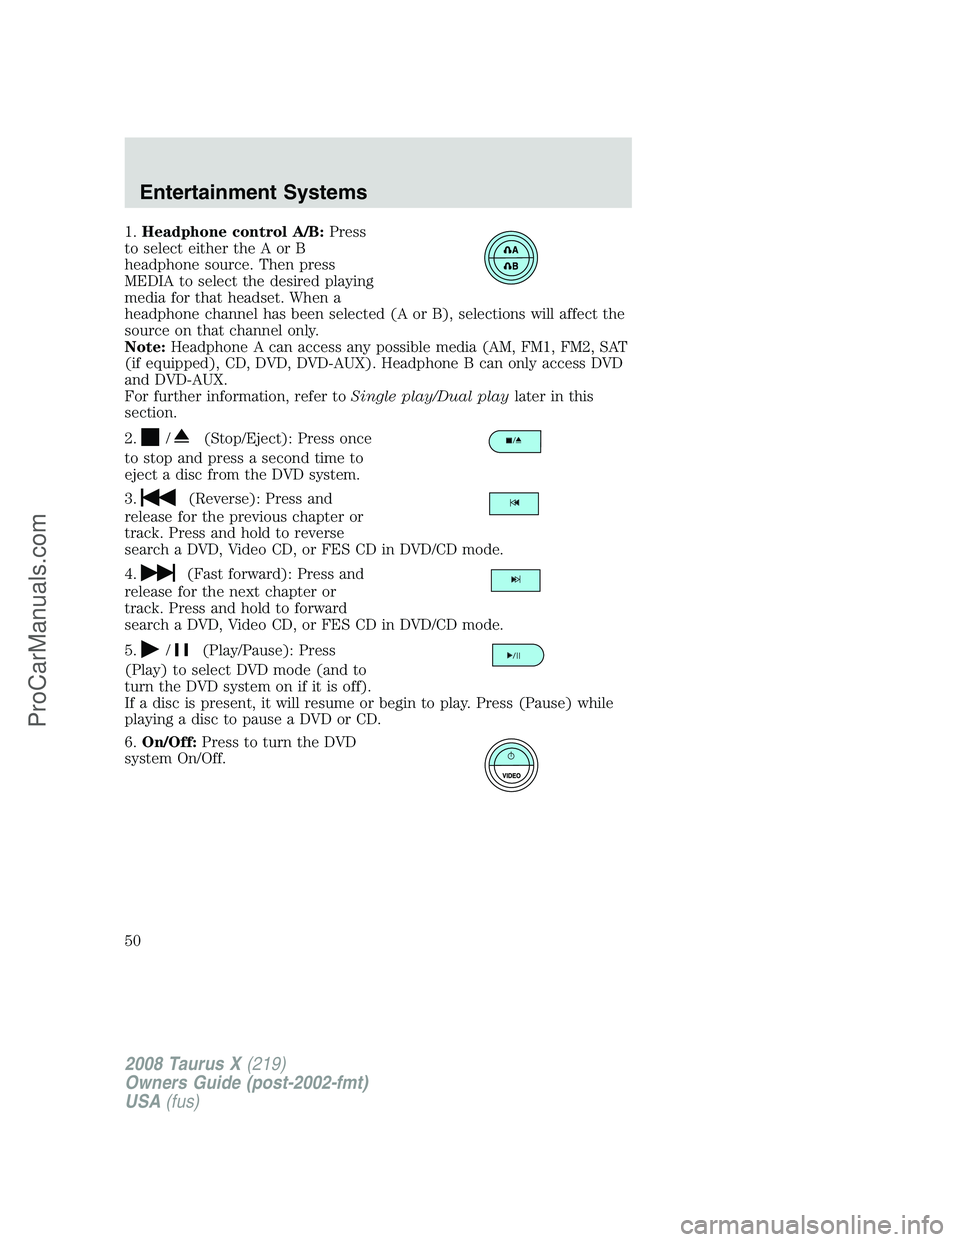 FORD FREESTYLE 2008 Service Manual 1.Headphone control A/B:Press
to select either the A or B
headphone source. Then press
MEDIA to select the desired playing
media for that headset. When a
headphone channel has been selected (A or B), 